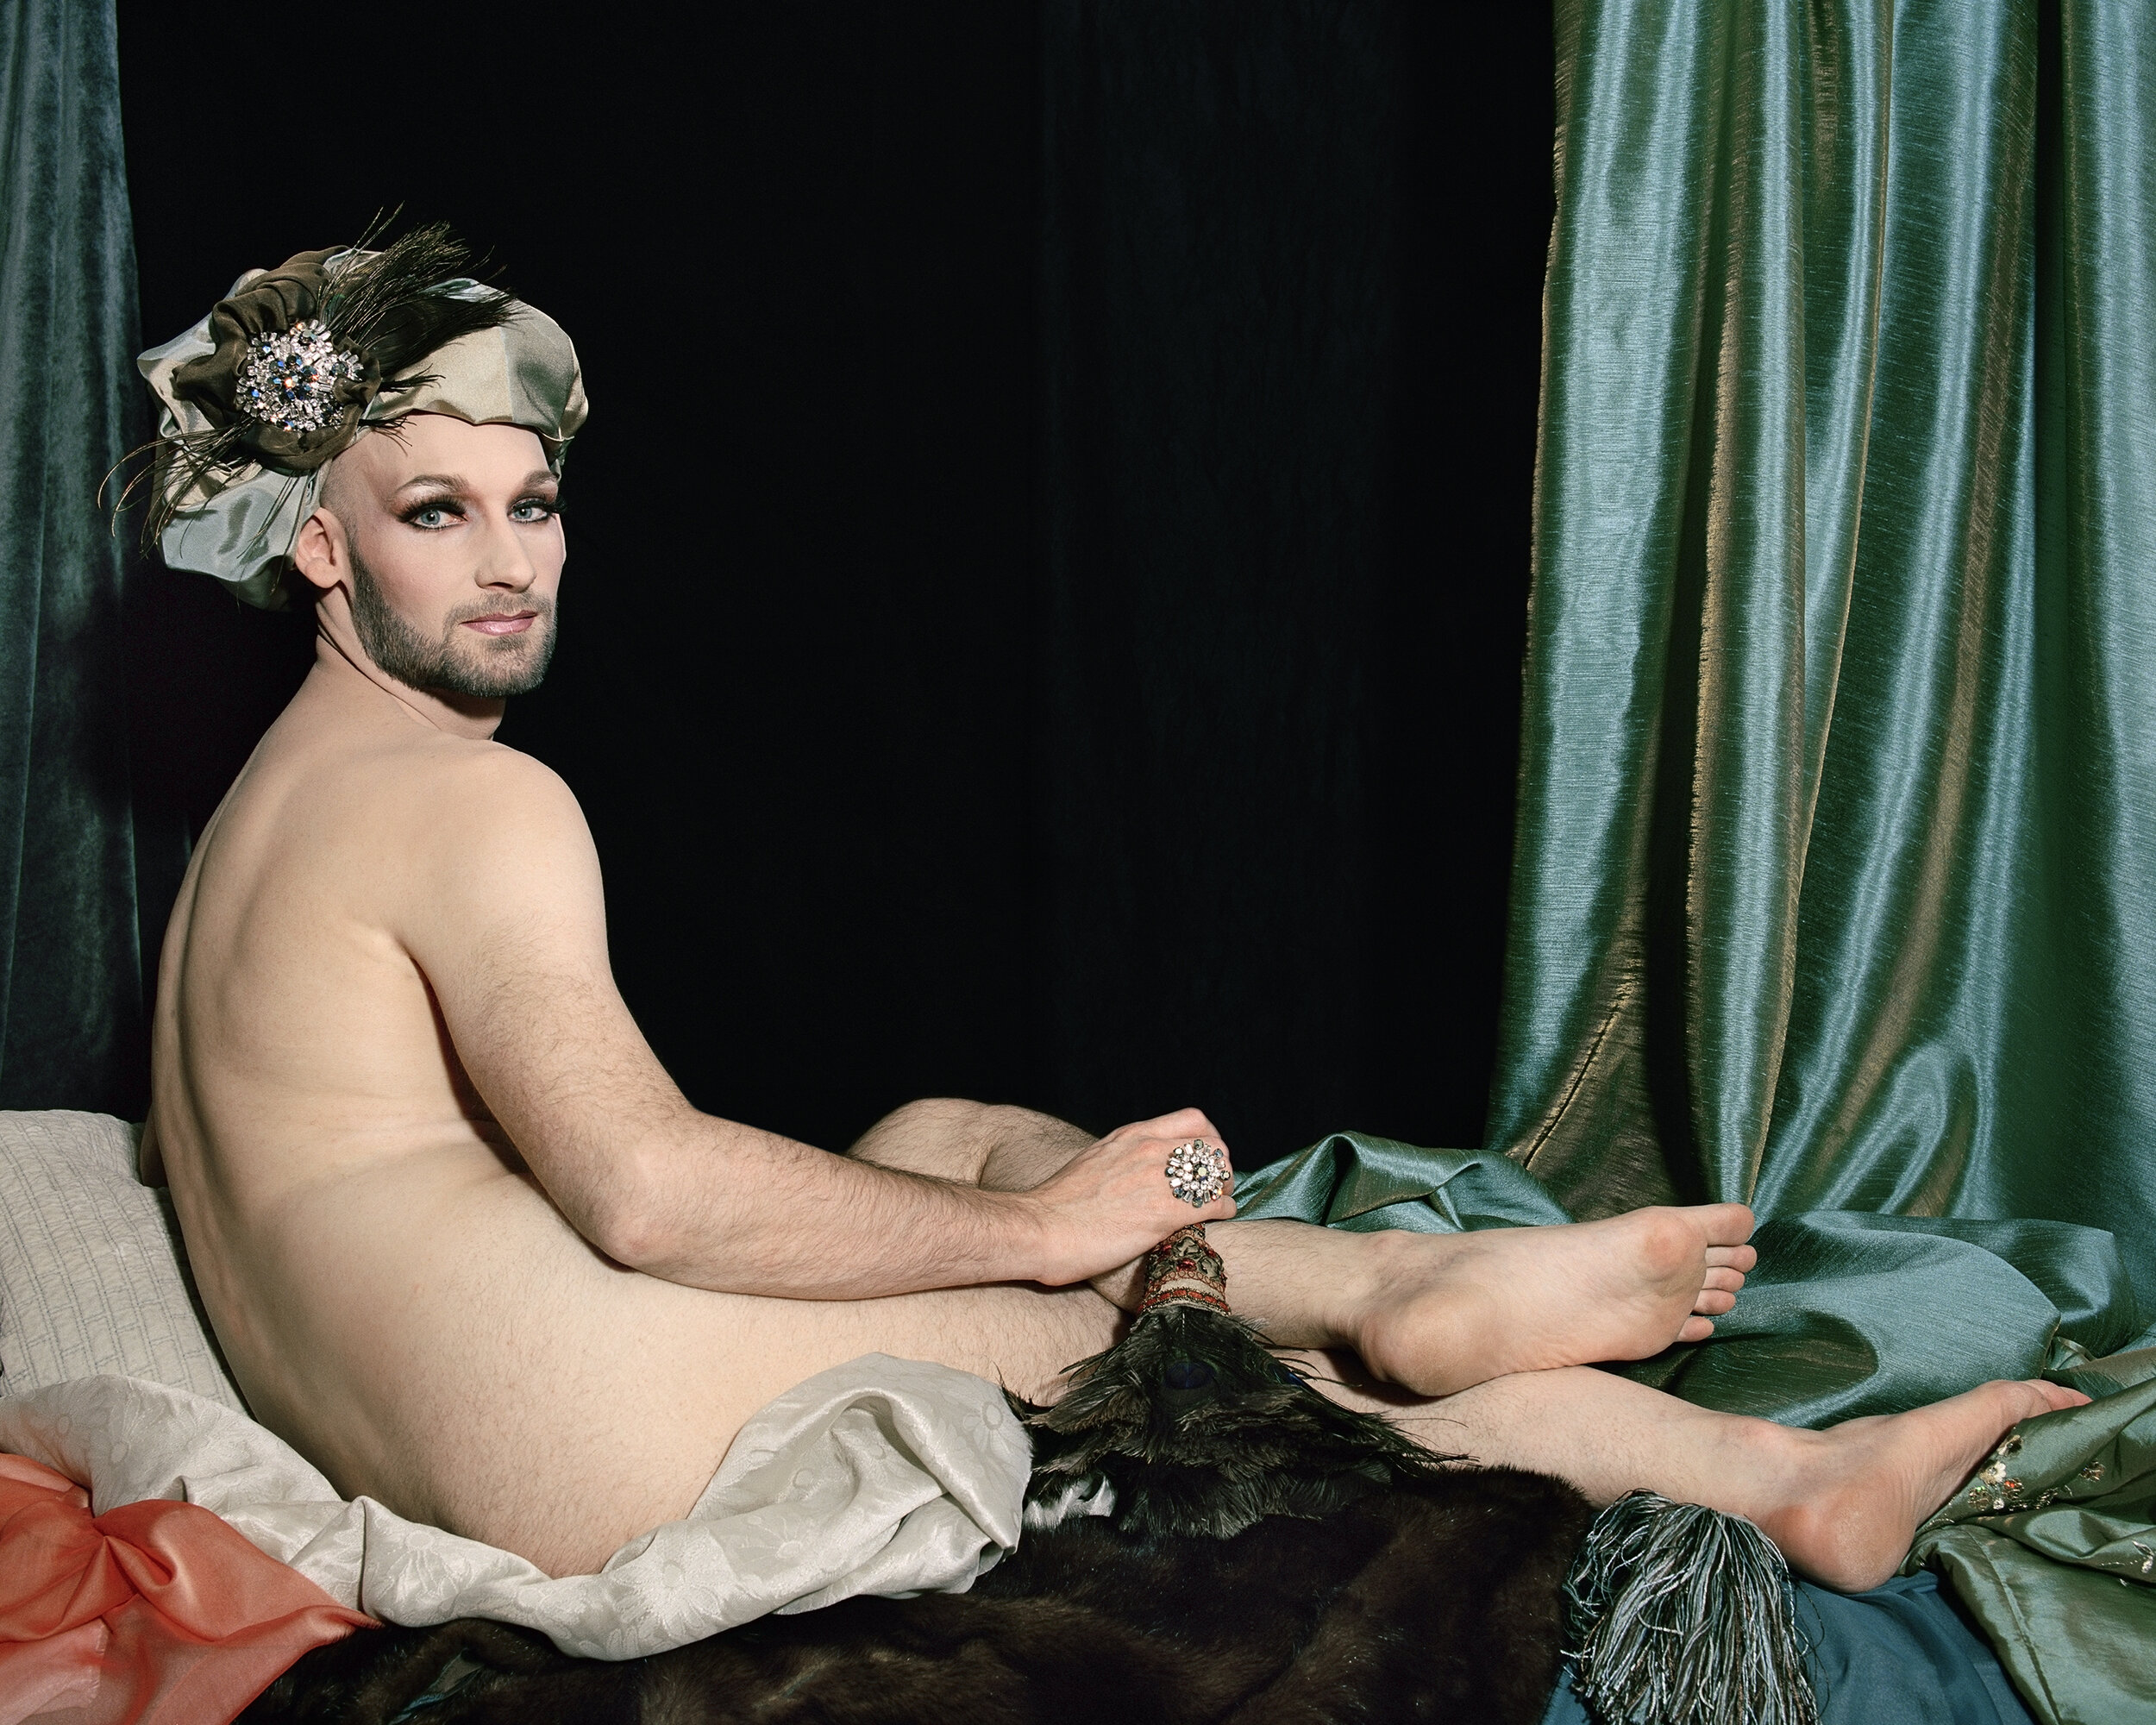  Odalisque (after Ingres), 2009 